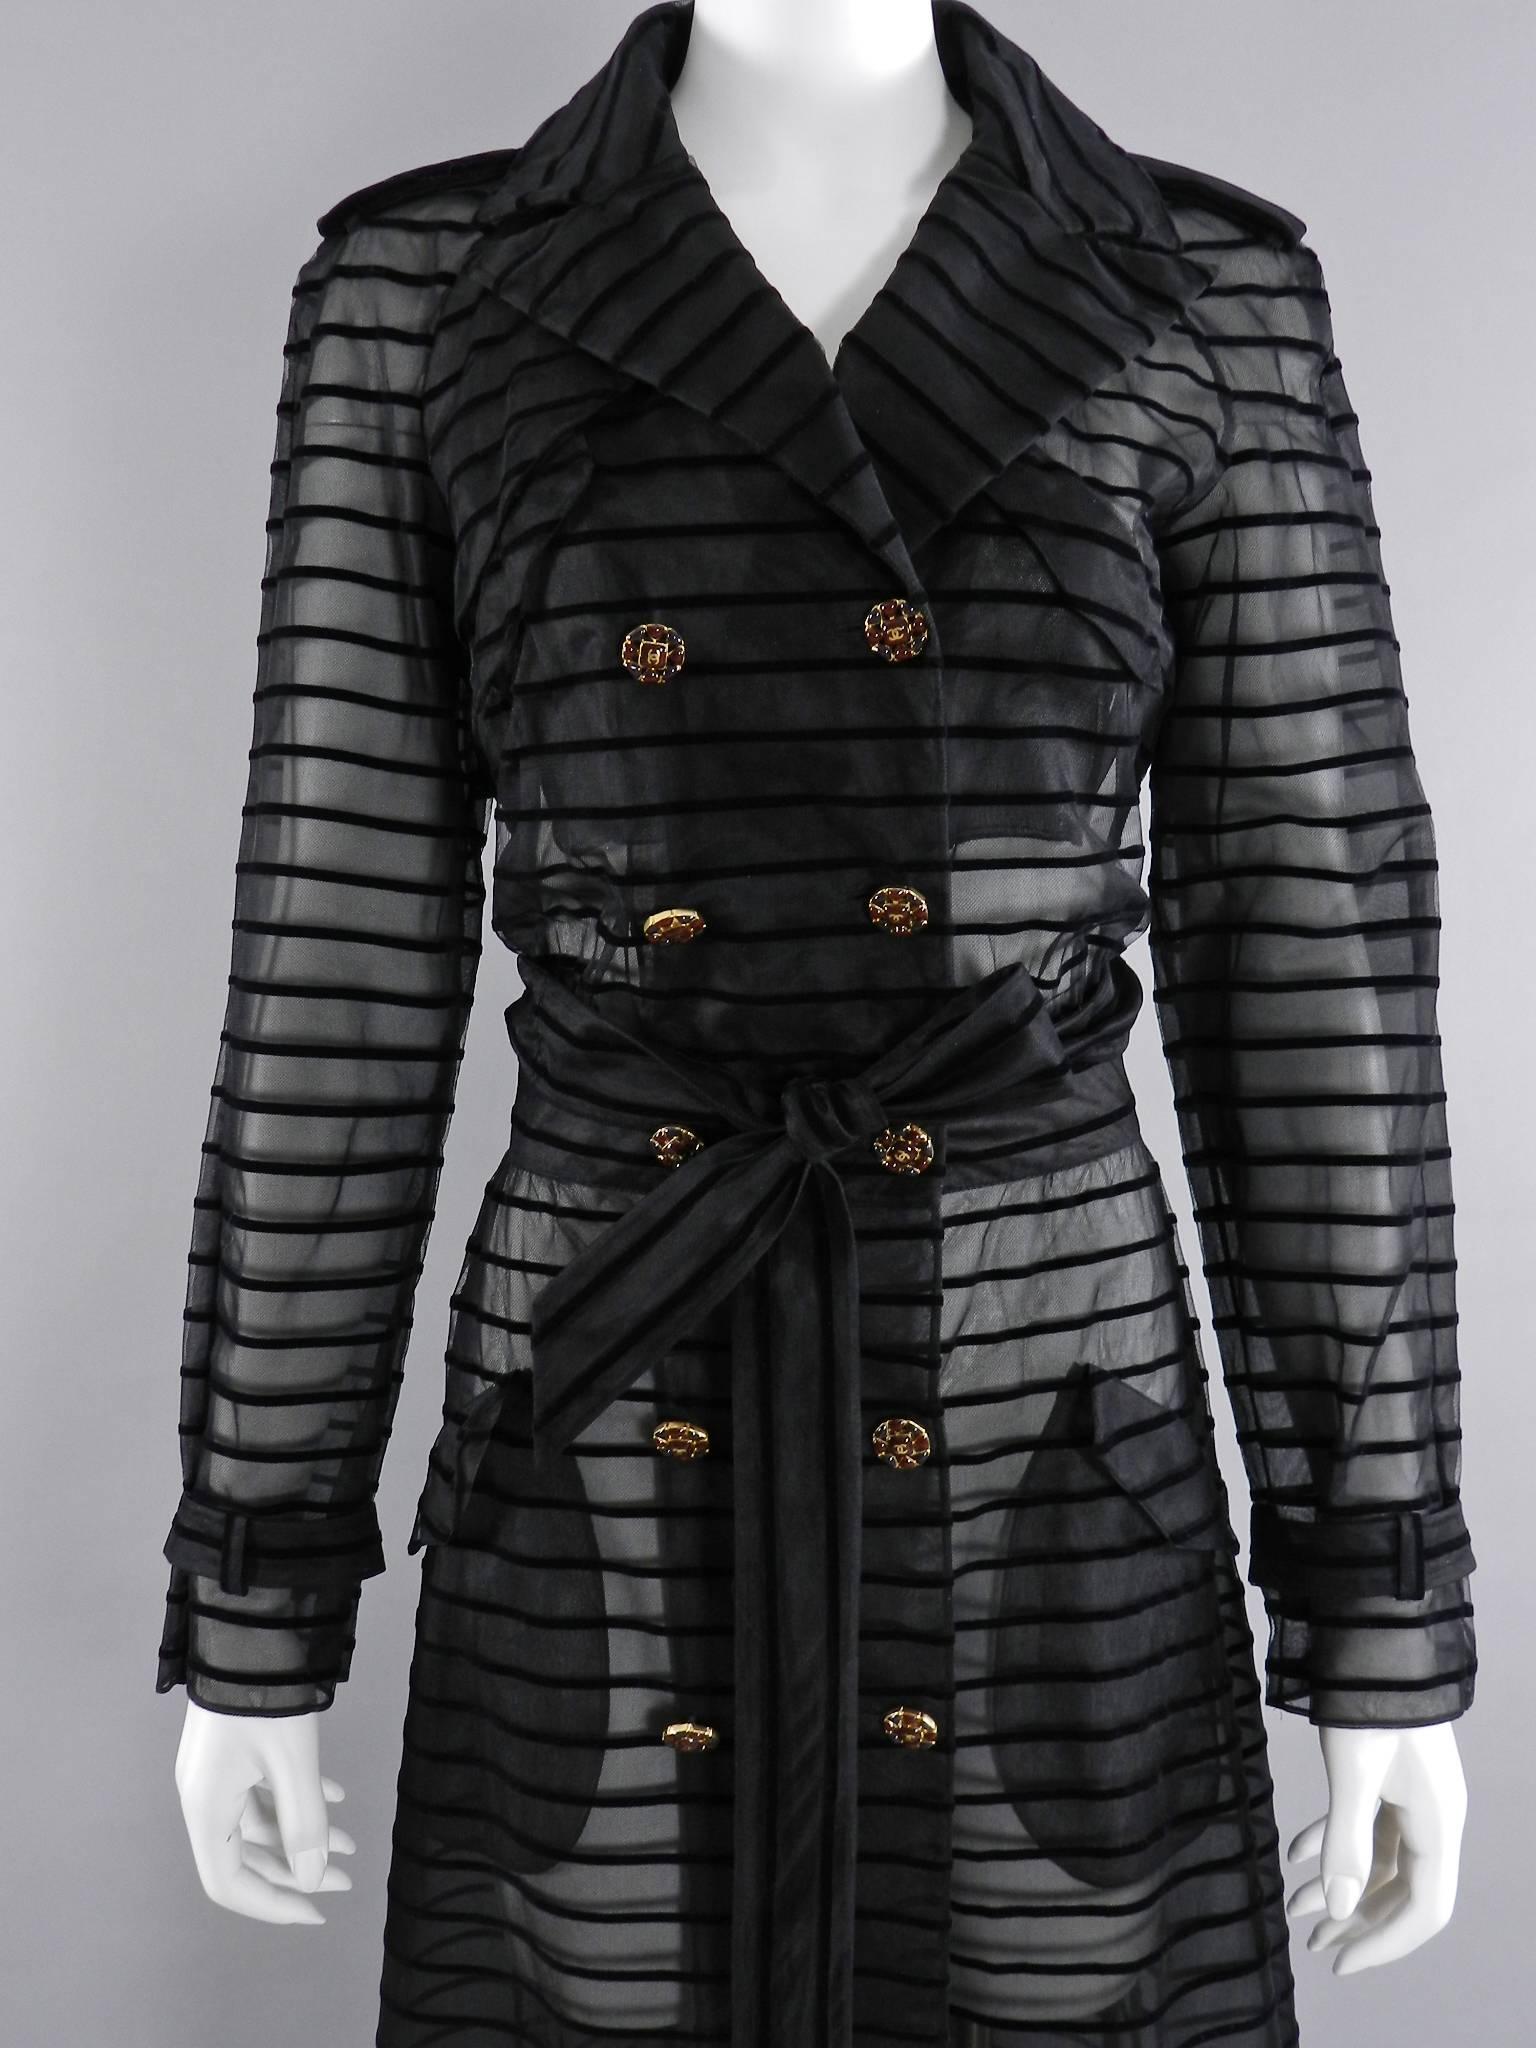 Women's Chanel 10C Long Sheer Black Striped duster Jacket with Gripoix Buttons